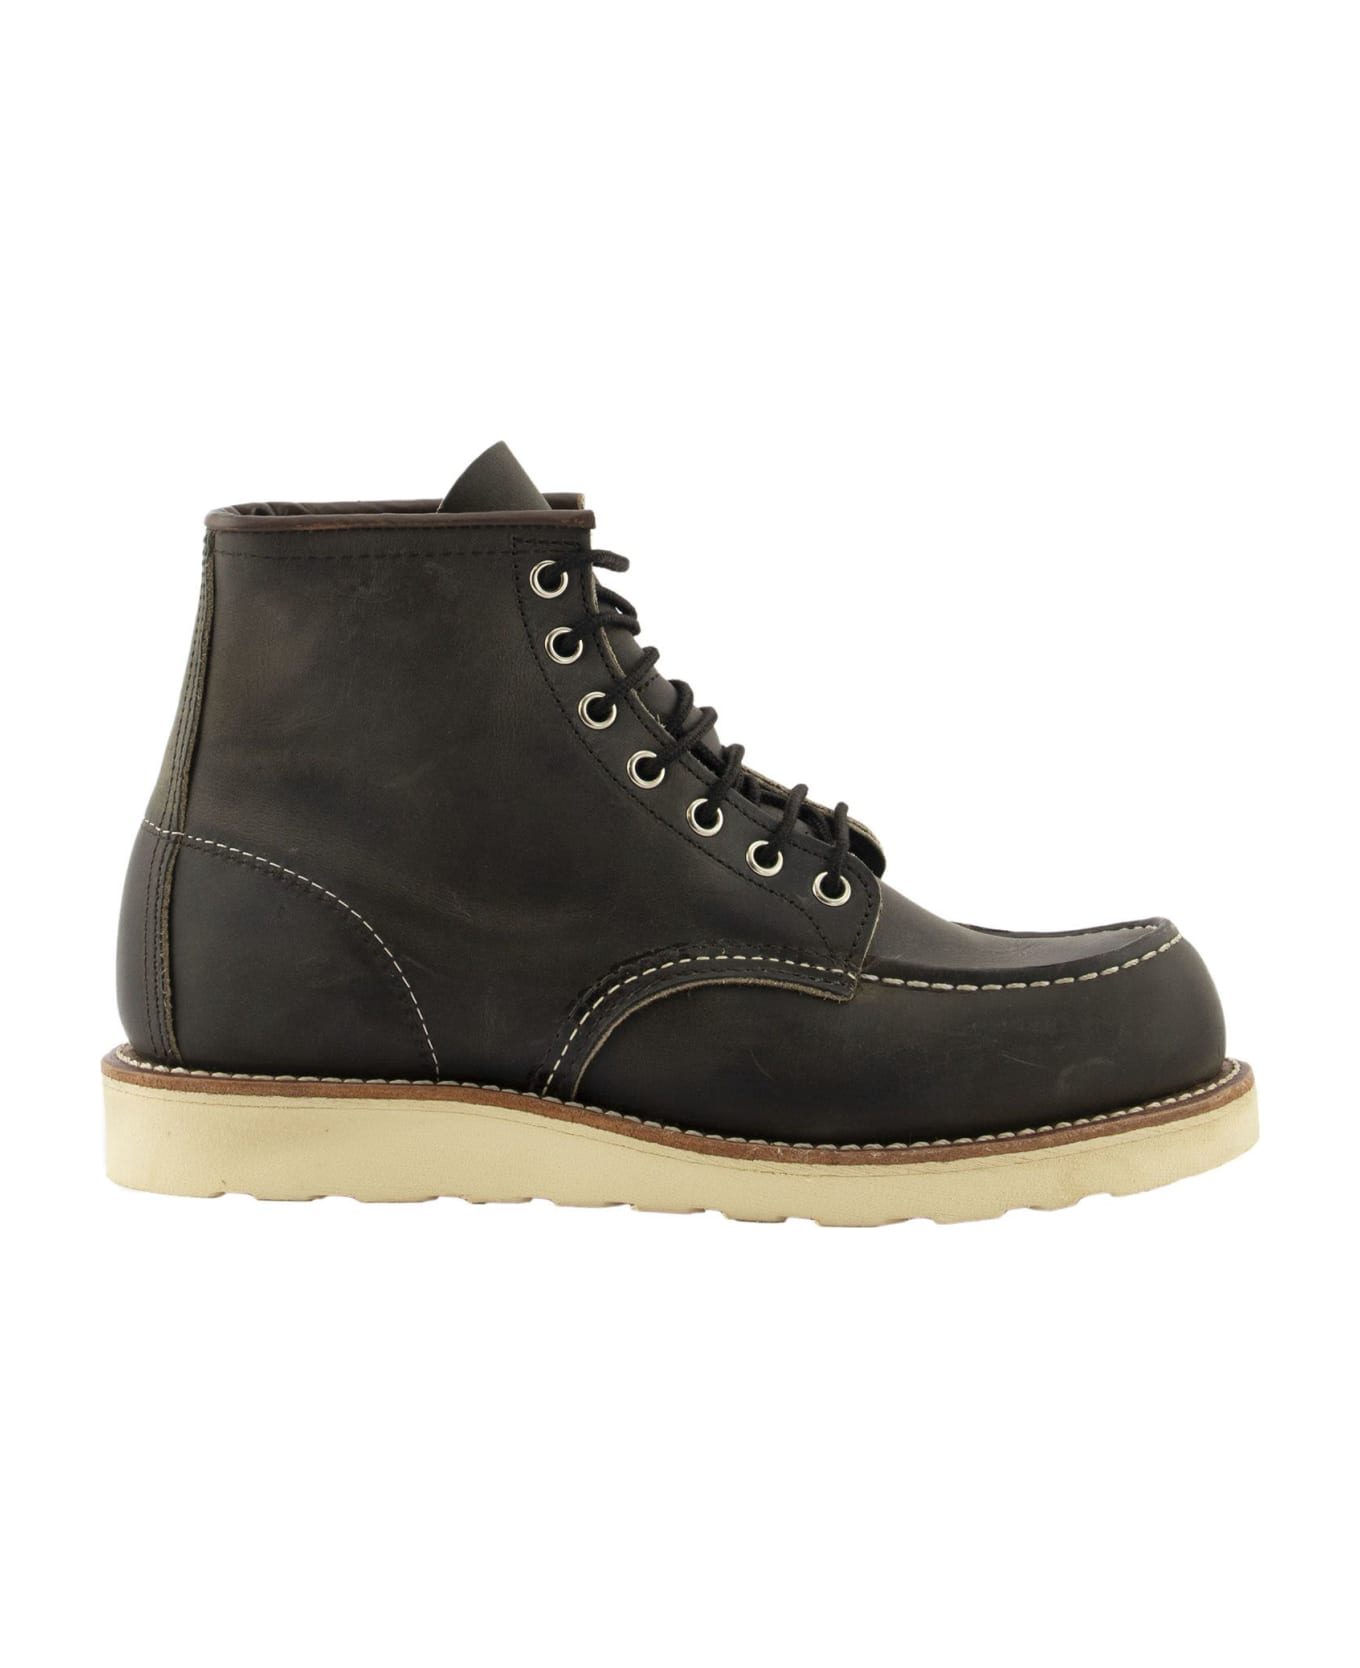 Red Wing Boot Charcoal - Charcoal